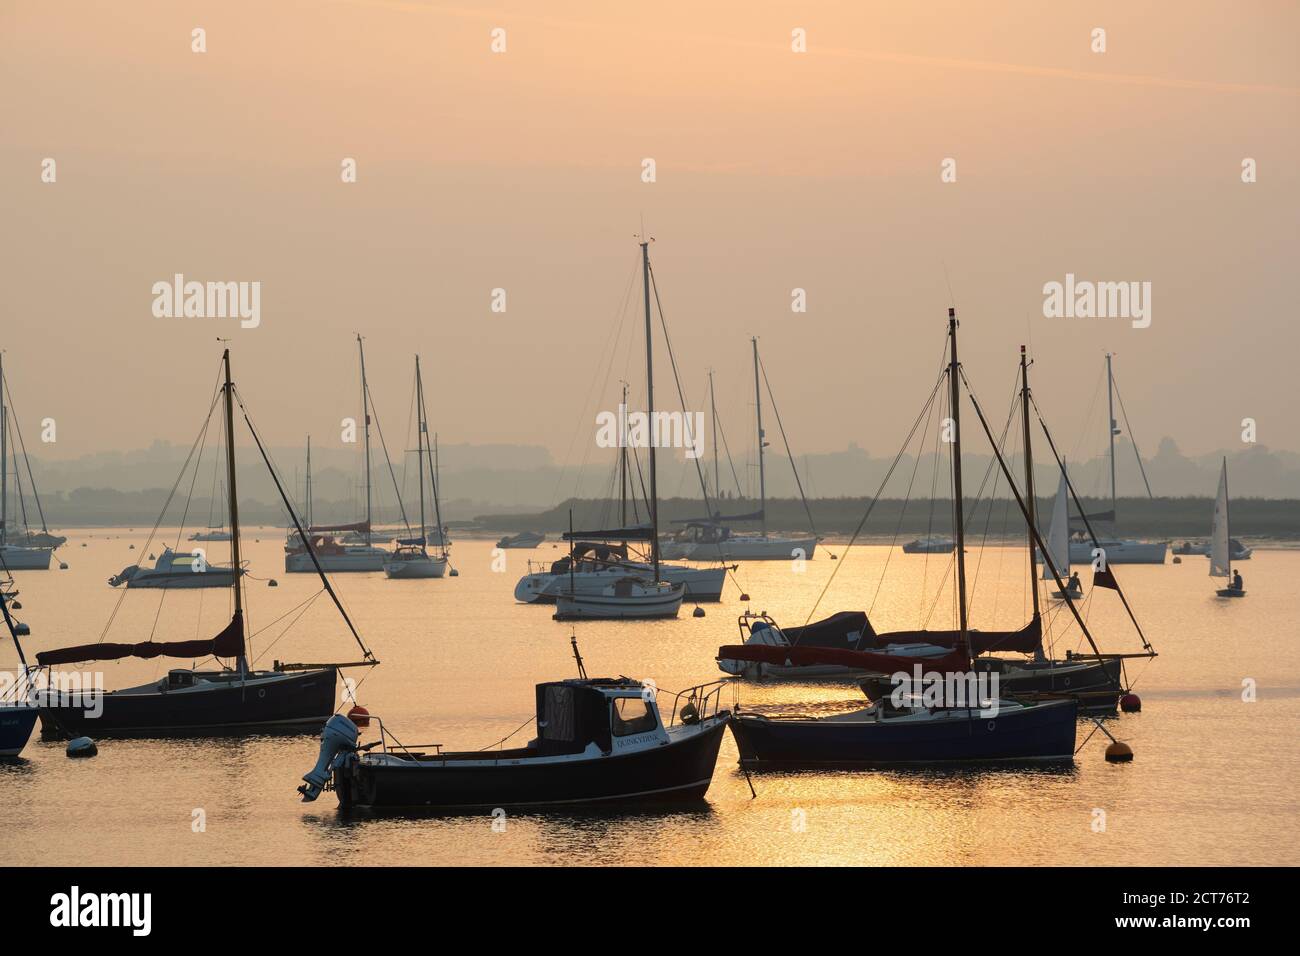 Slaughden, Aldeburgh, Suffolk. UK.  September 15th 2020.  Scene of yachts and boats moored on the River Alde at Aldeburgh Yacht Club in the evening. Stock Photo